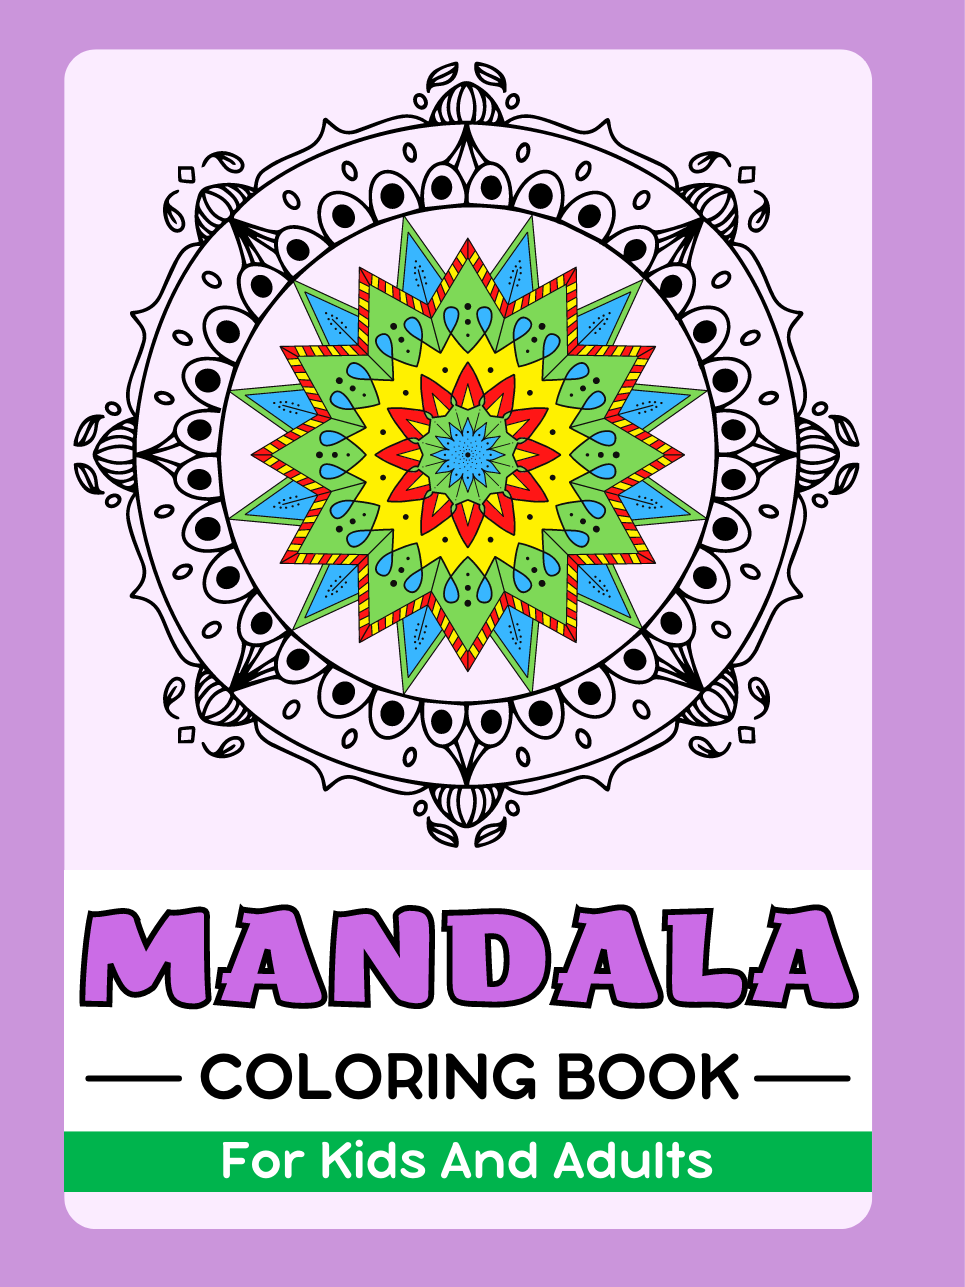 Mandala Coloring Book For Kids And Adults